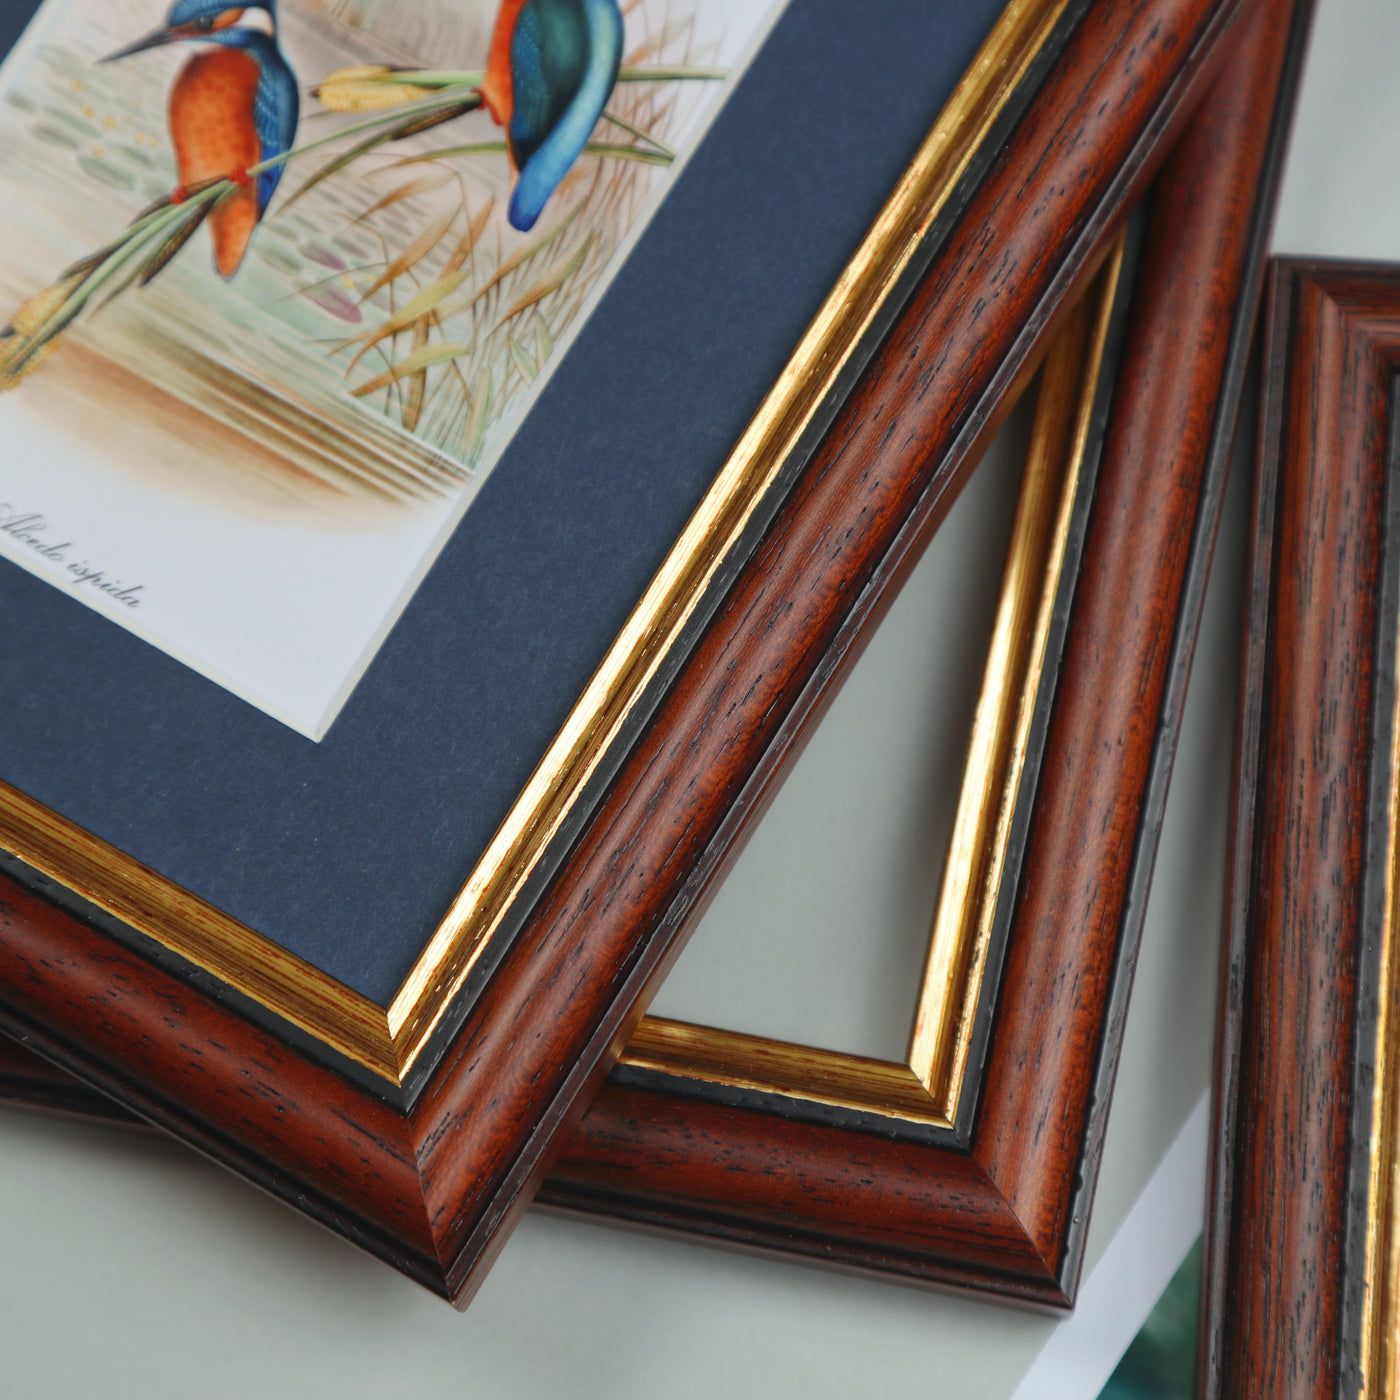 20x16 Brown & Gold Picture Frame with a 16x12 Mount